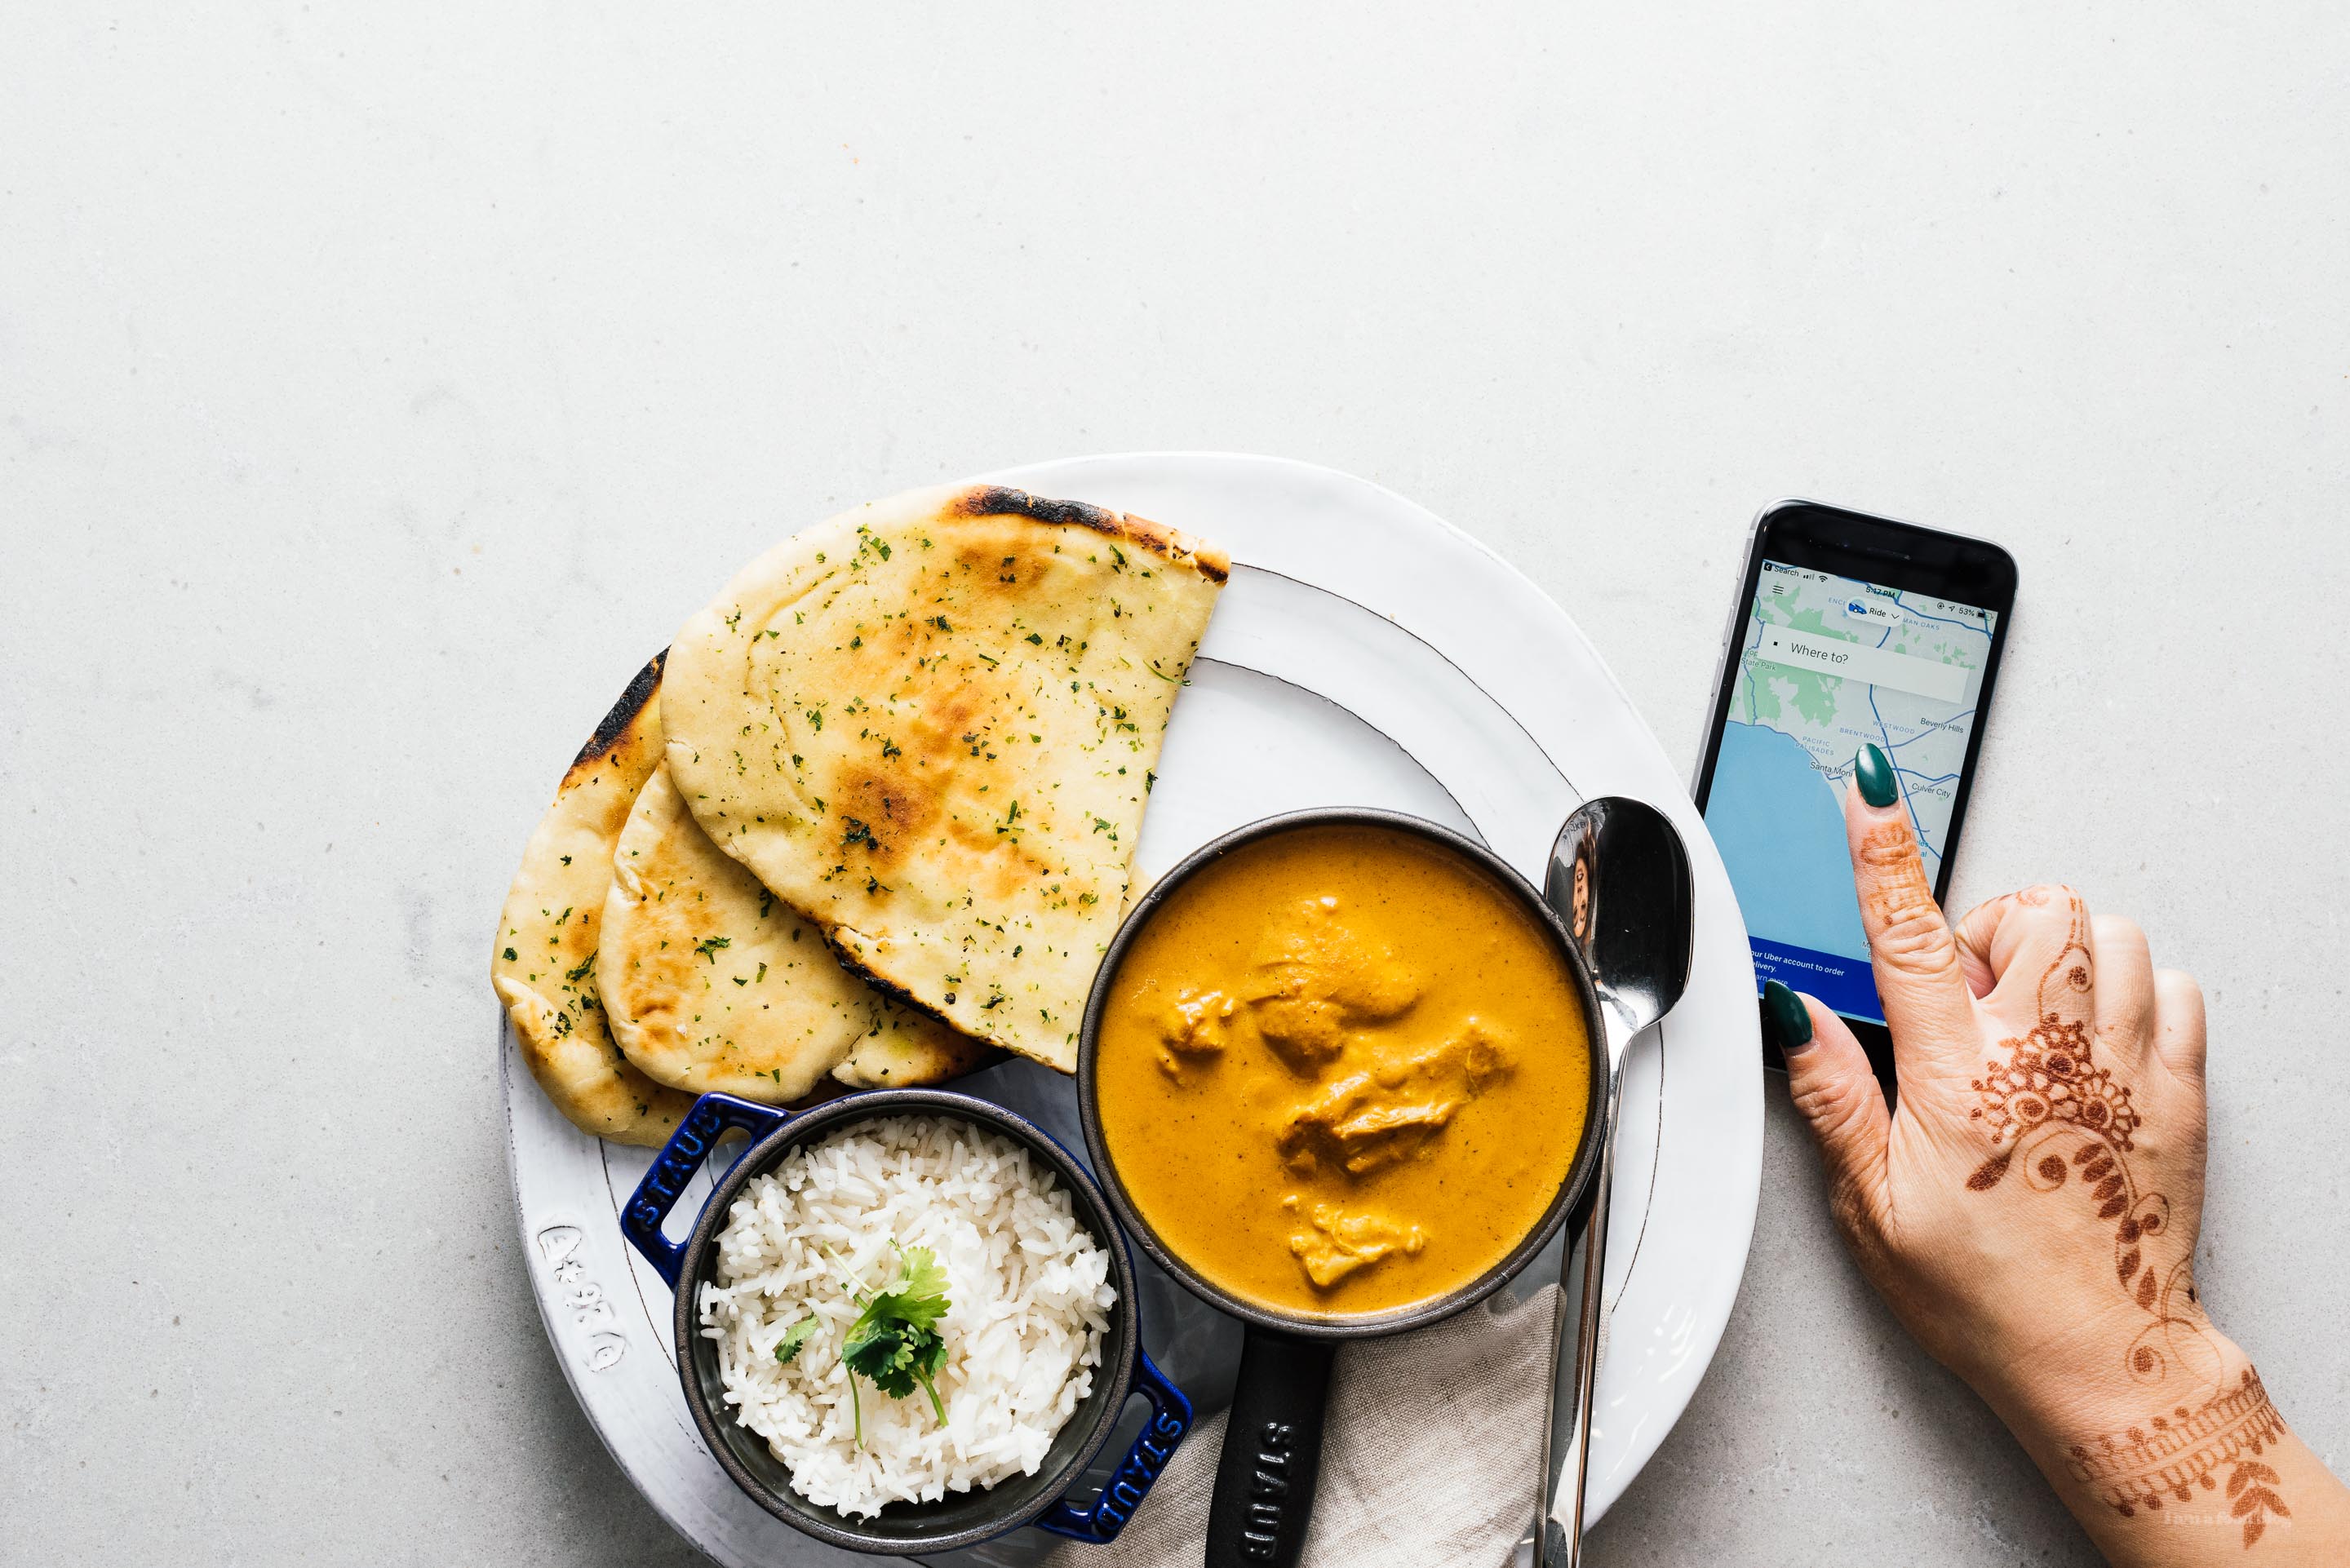 An Instant Pot Butter Chicken Recipe, Diwali, Uber, and Asian Heritage